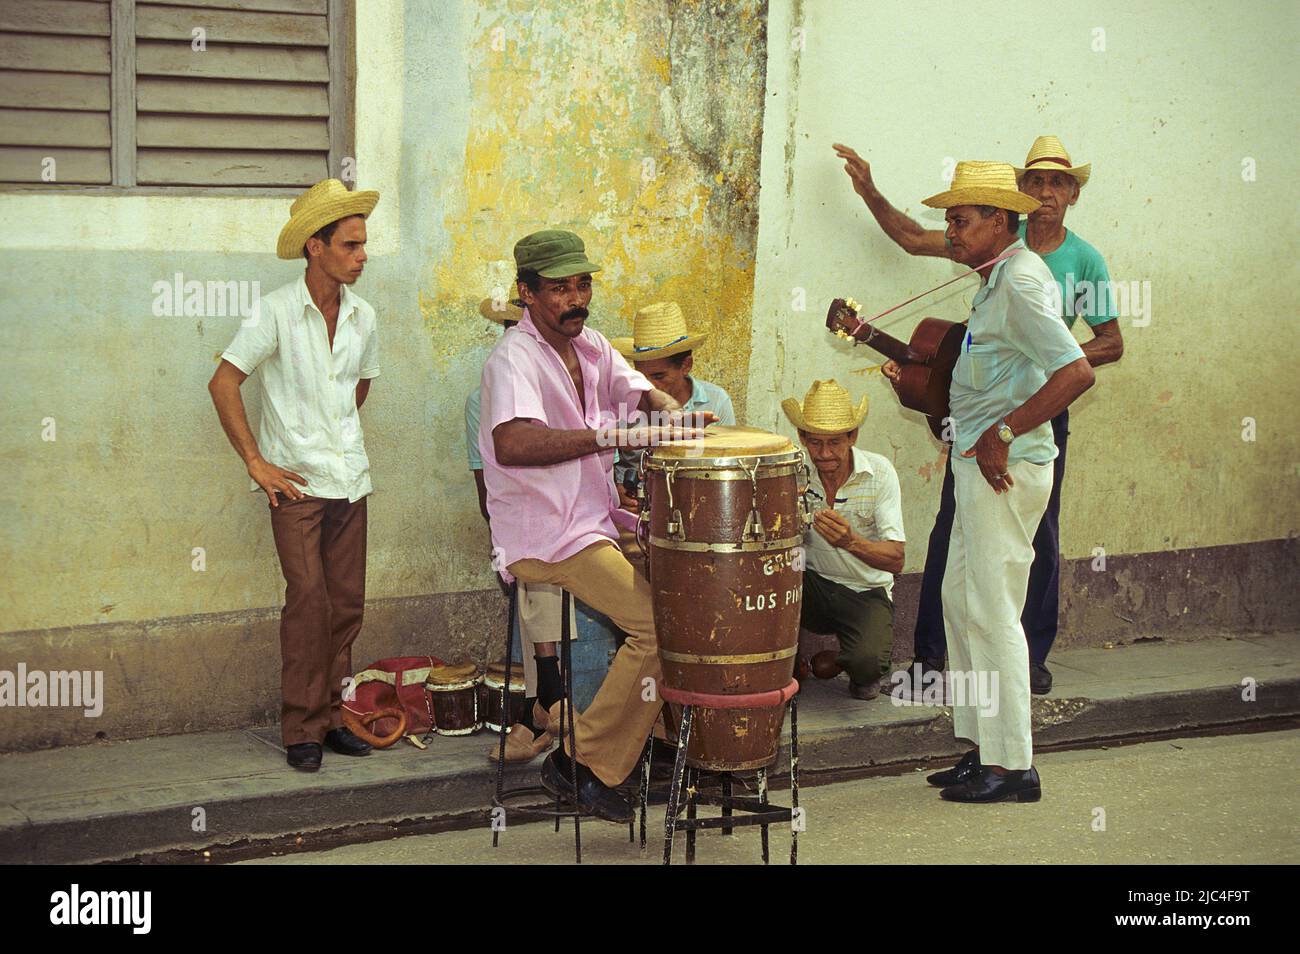 Street musician in a alley of Trinidad, Unesco World Heritage Site, Cuba, Caribbean Stock Photo